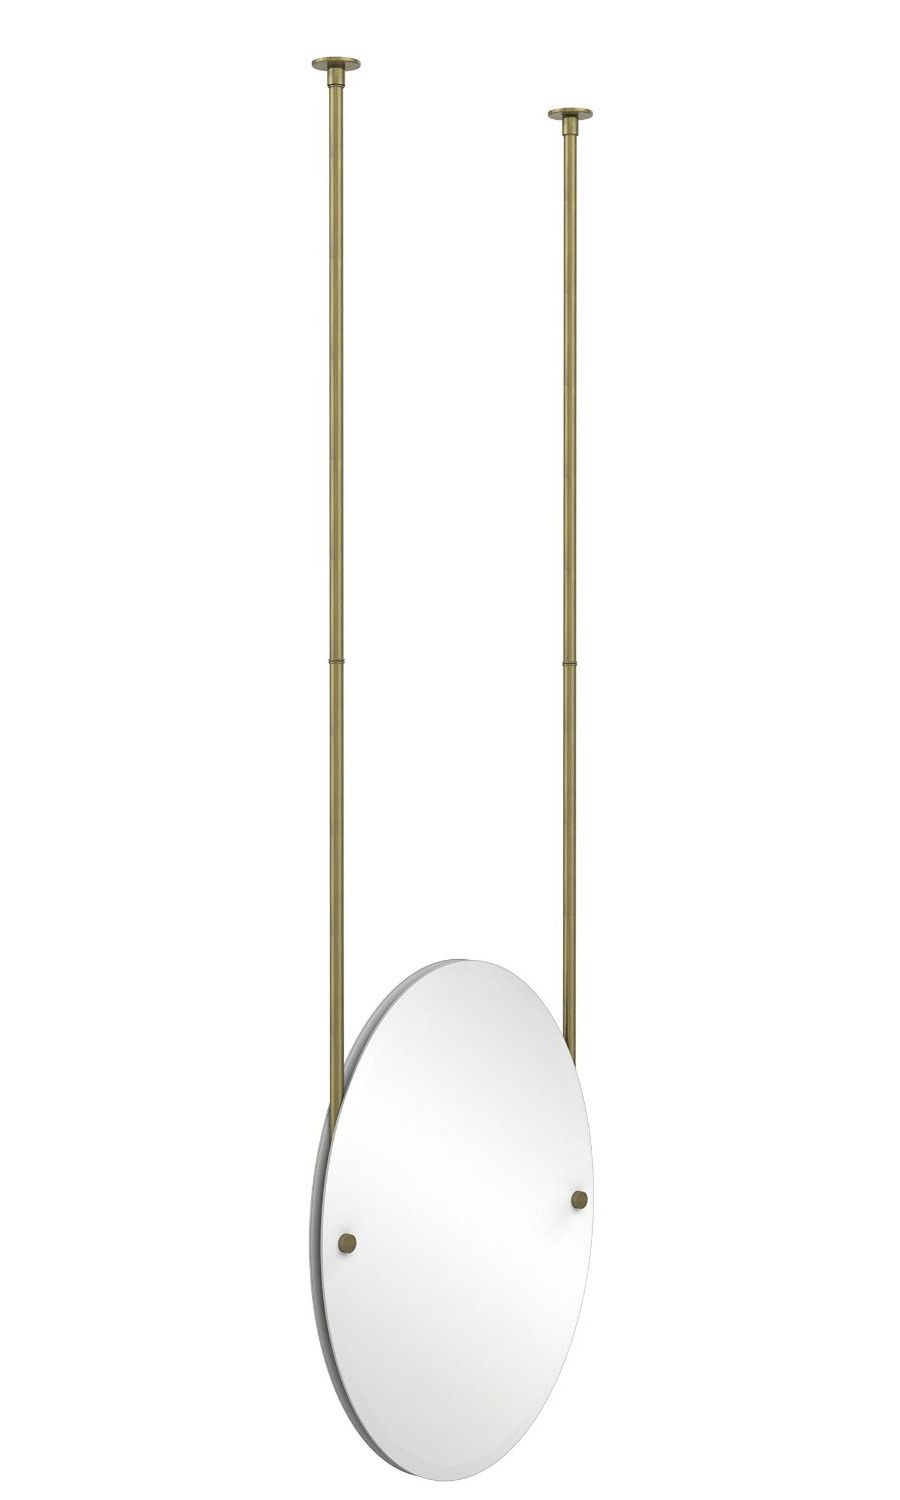 Allied Brass Ch 91 Oval Ceiling Hung Mirror With Solid Brass Hardware Regarding Ceiling Hung Polished Nickel Oval Mirrors (View 7 of 15)